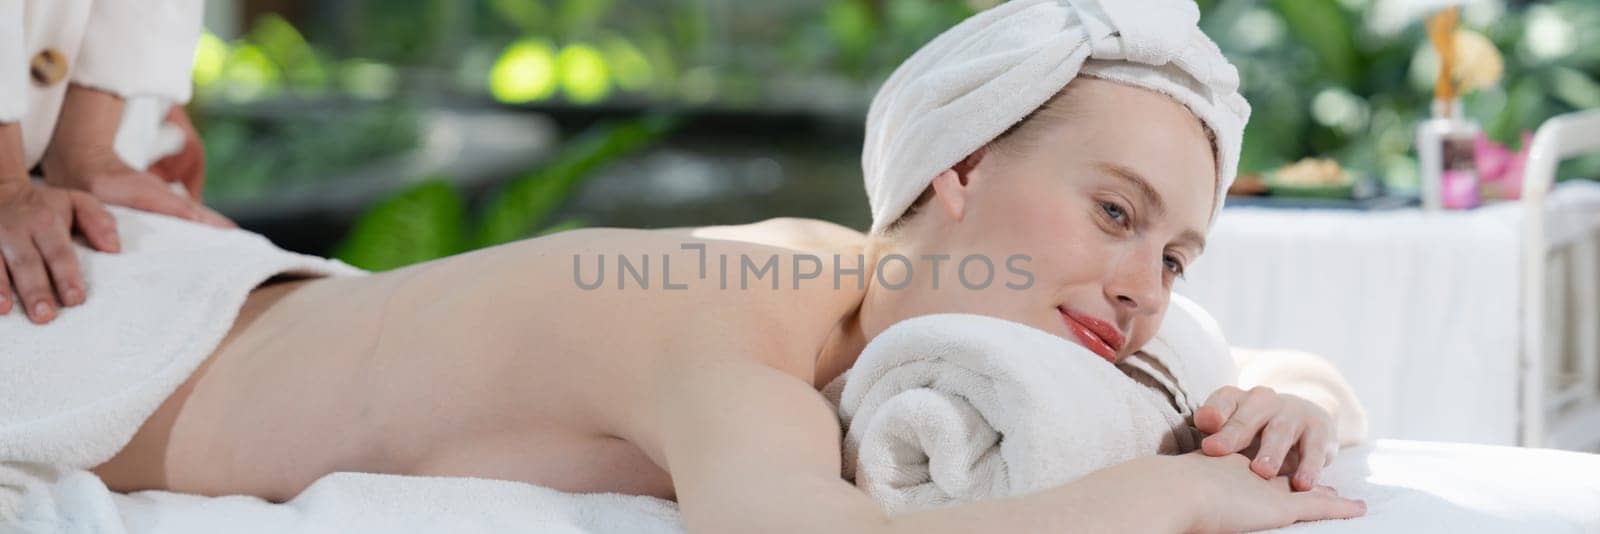 Beautiful young woman lies on white spa bed during having back massage. Attractive caucasian woman having back massage surrounded by natural environment. Relaxing and healthy concept Tranquility.